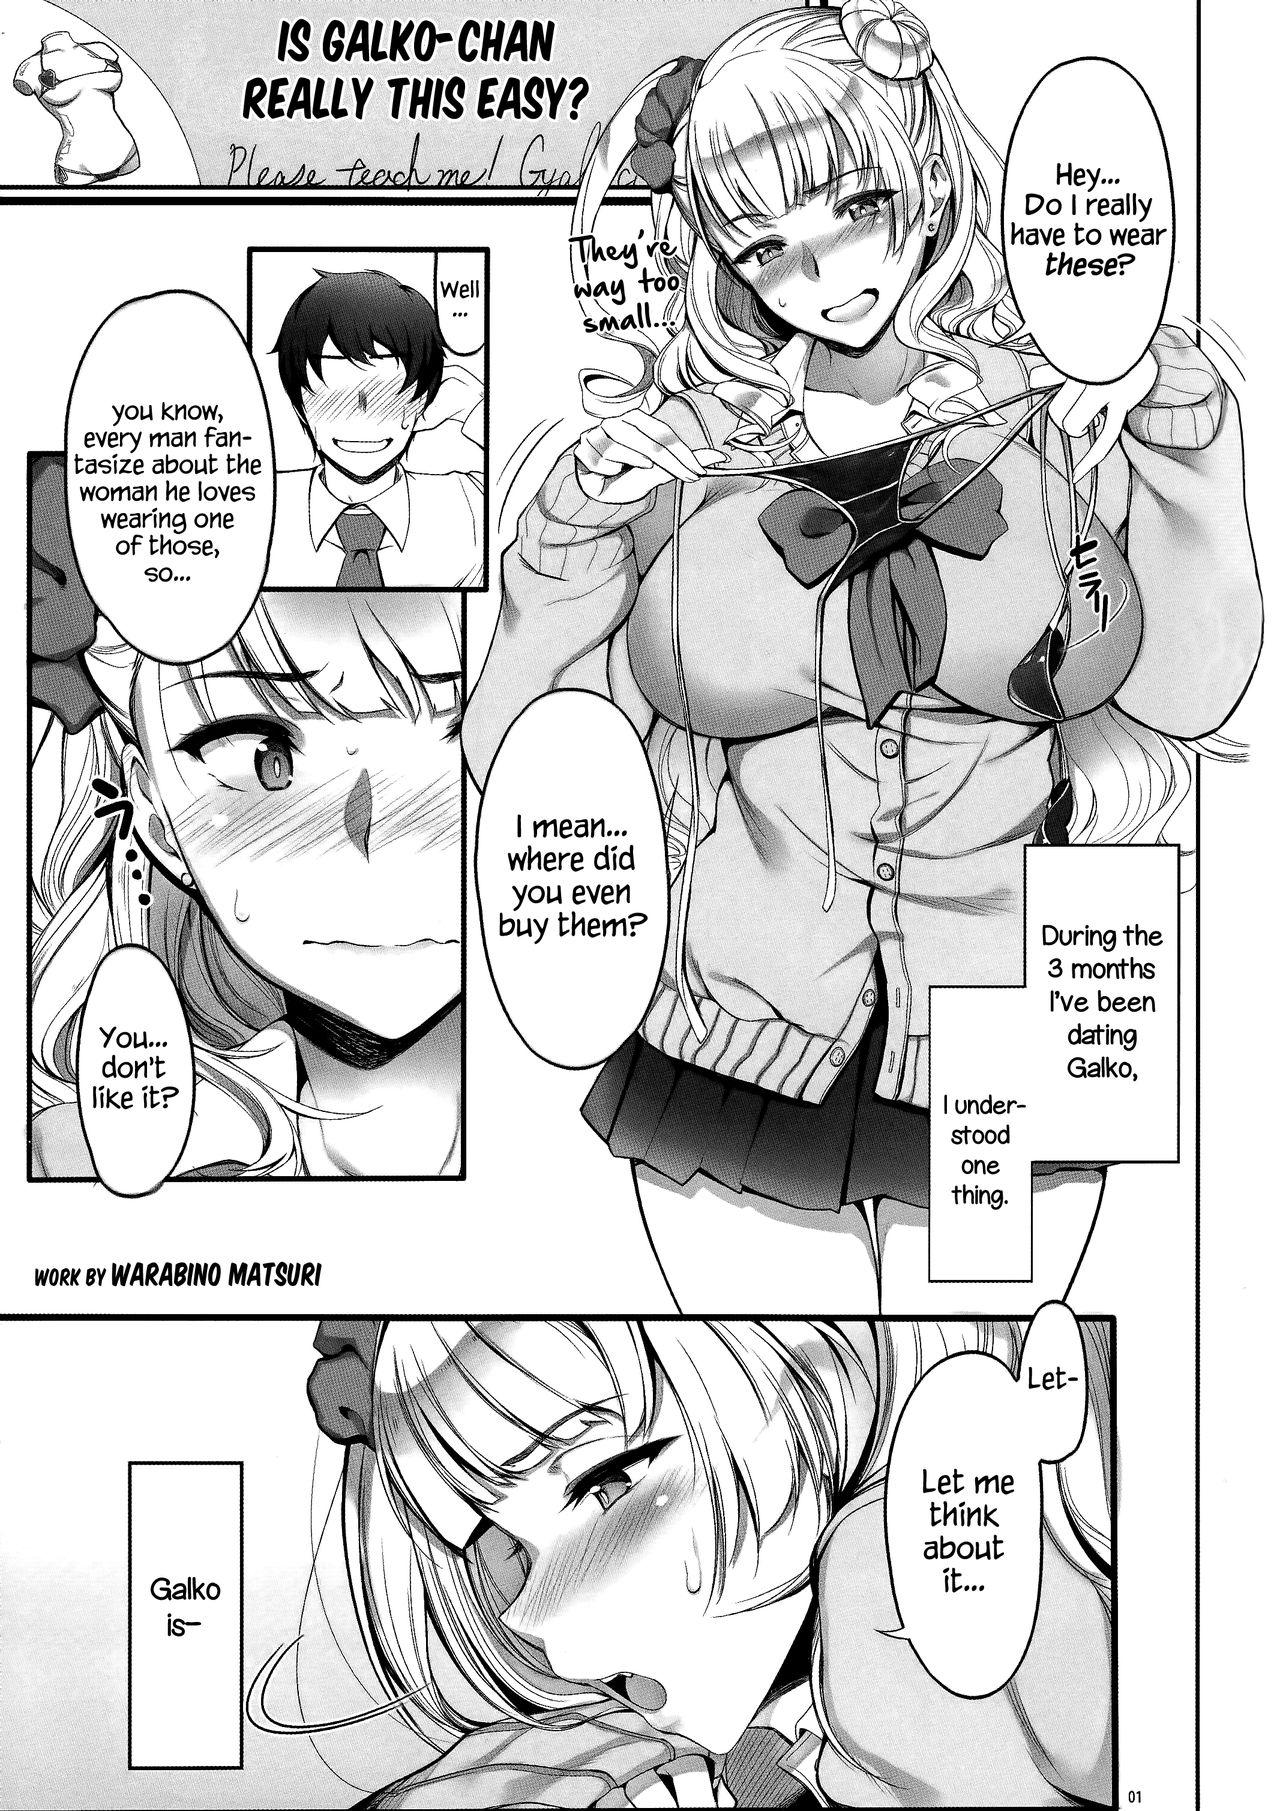 Monster Cock Angel's Stroke 87b Galko-chan 0.02!! - Oshiete galko-chan Petite Teenager - Page 3